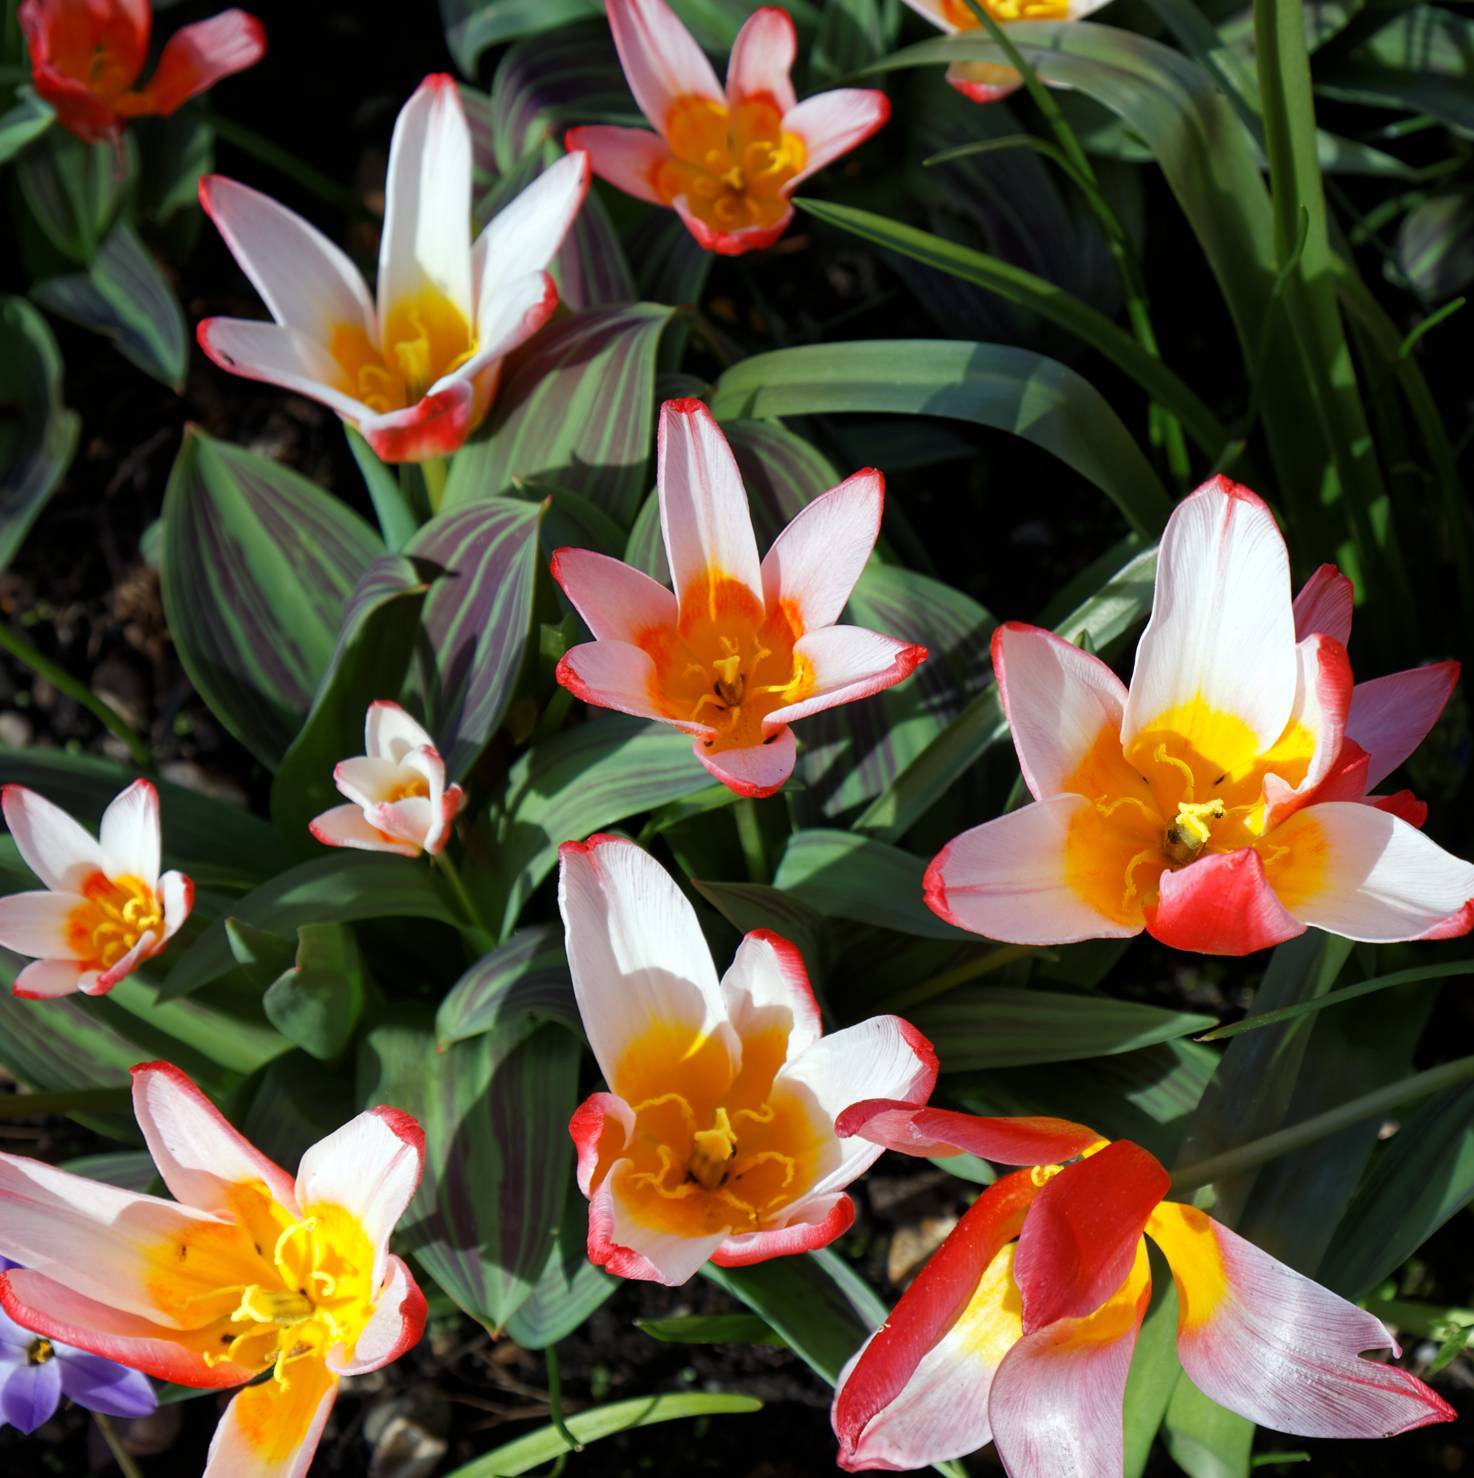 red-white flowers with yellow center, green-purple leaves and green stems